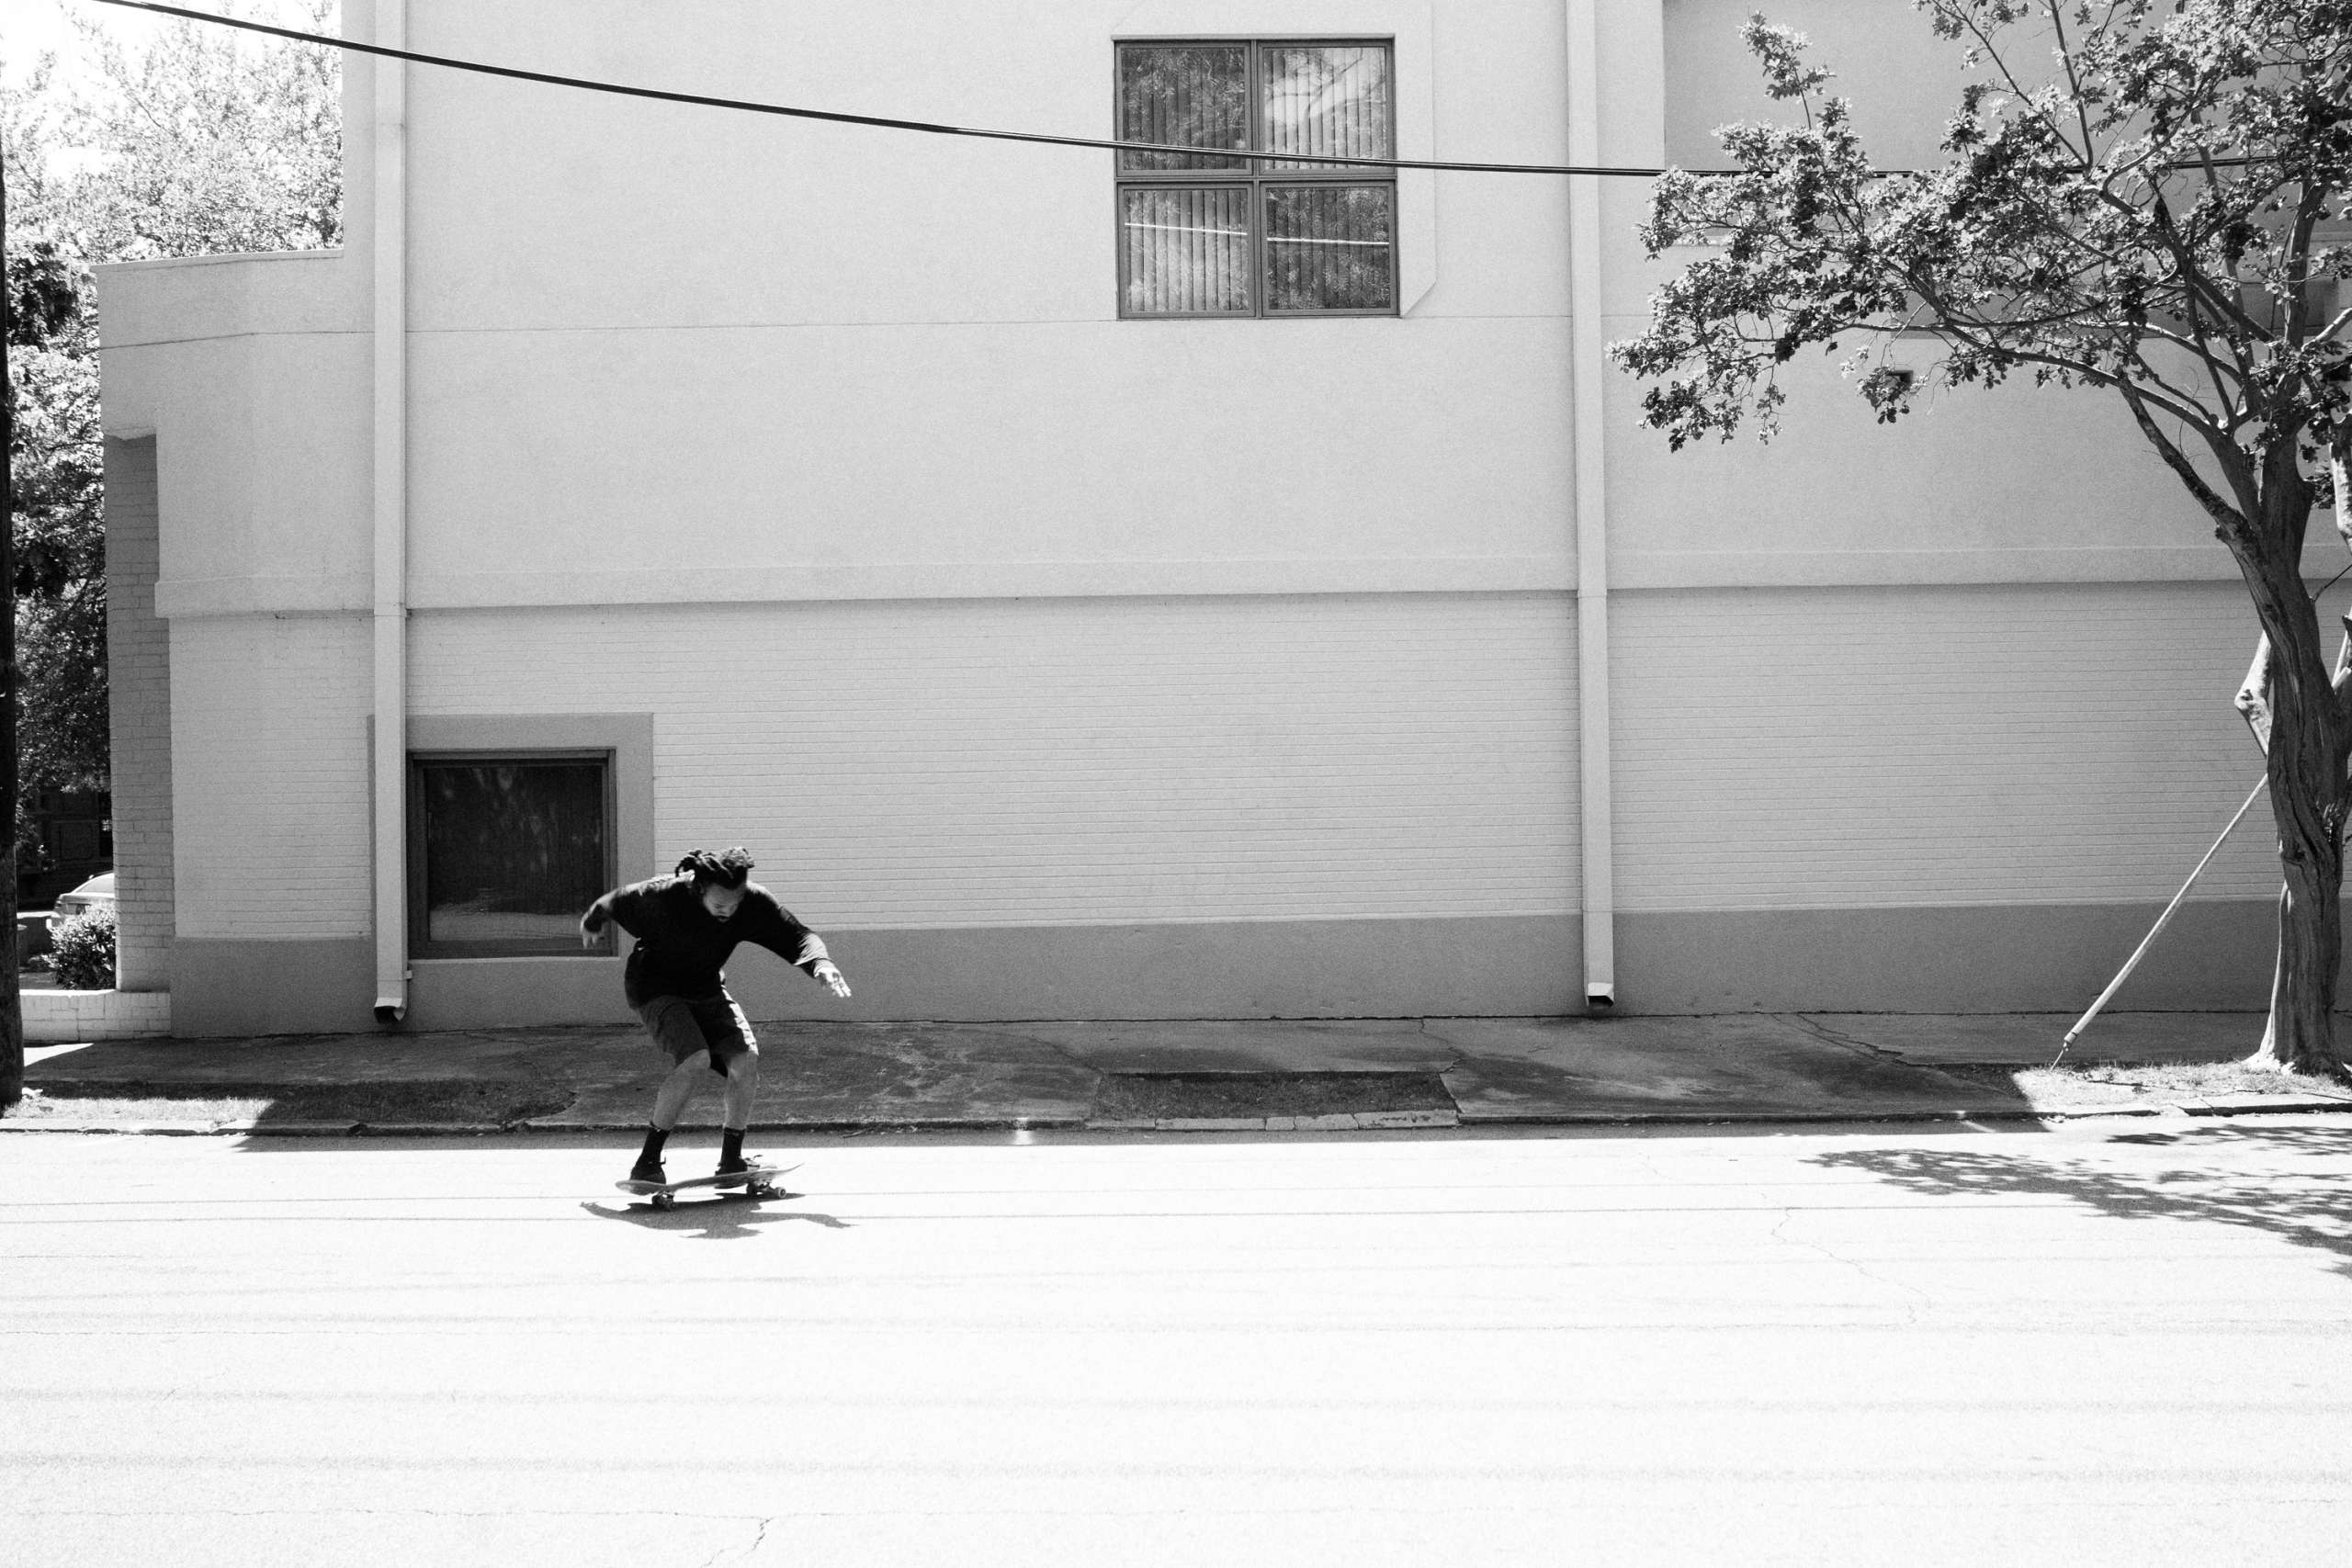 Man skating in black and white.